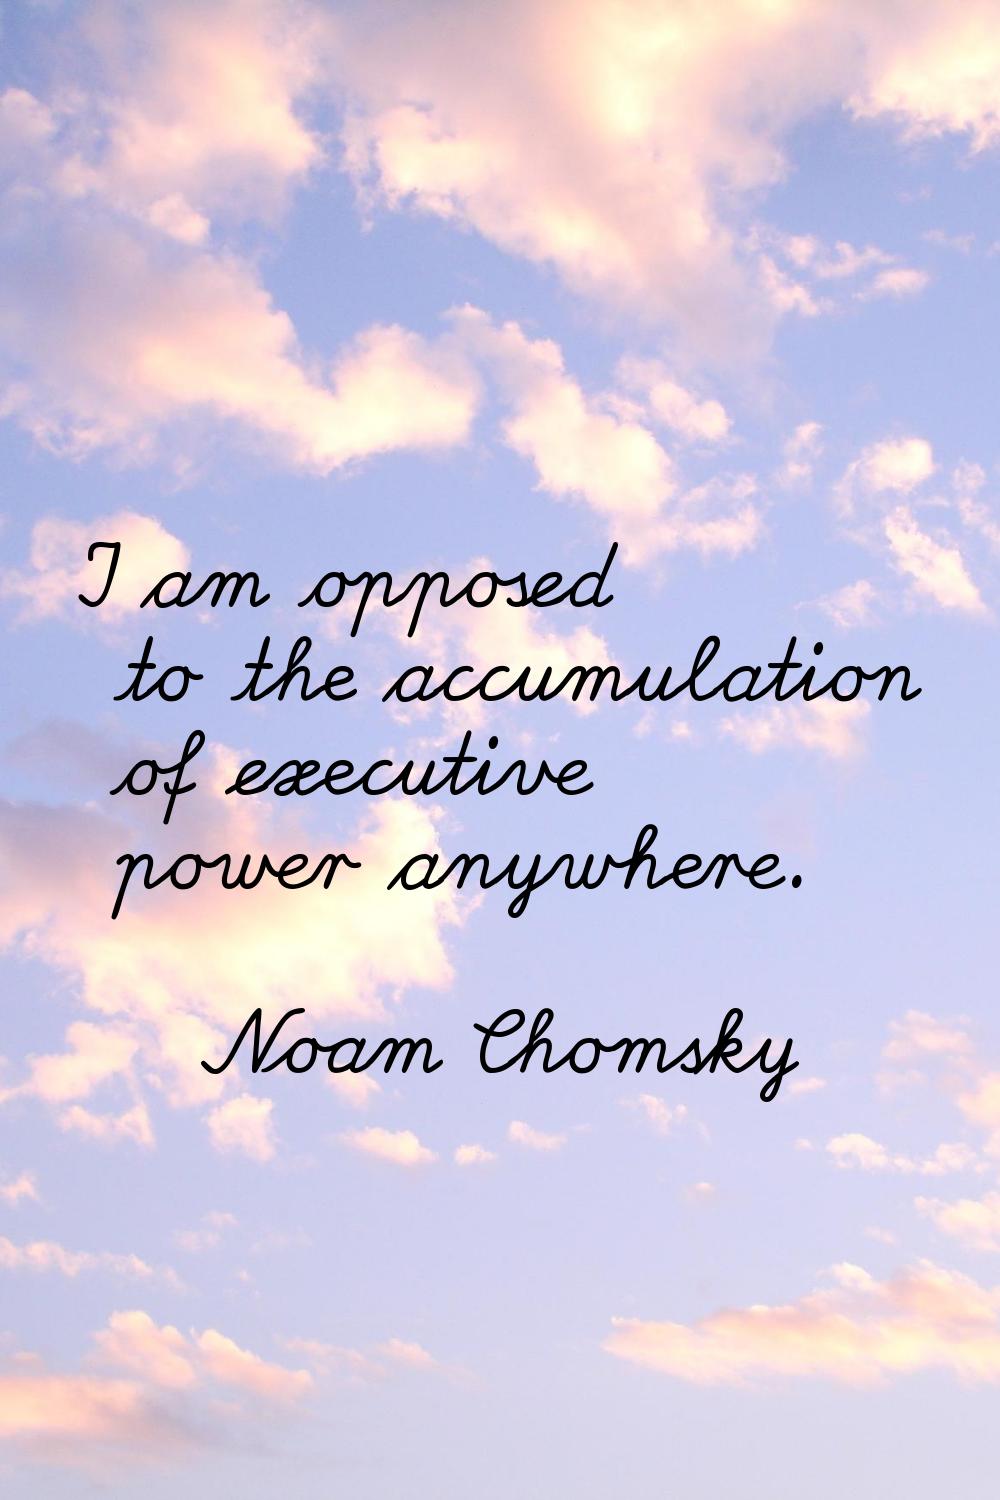 I am opposed to the accumulation of executive power anywhere.